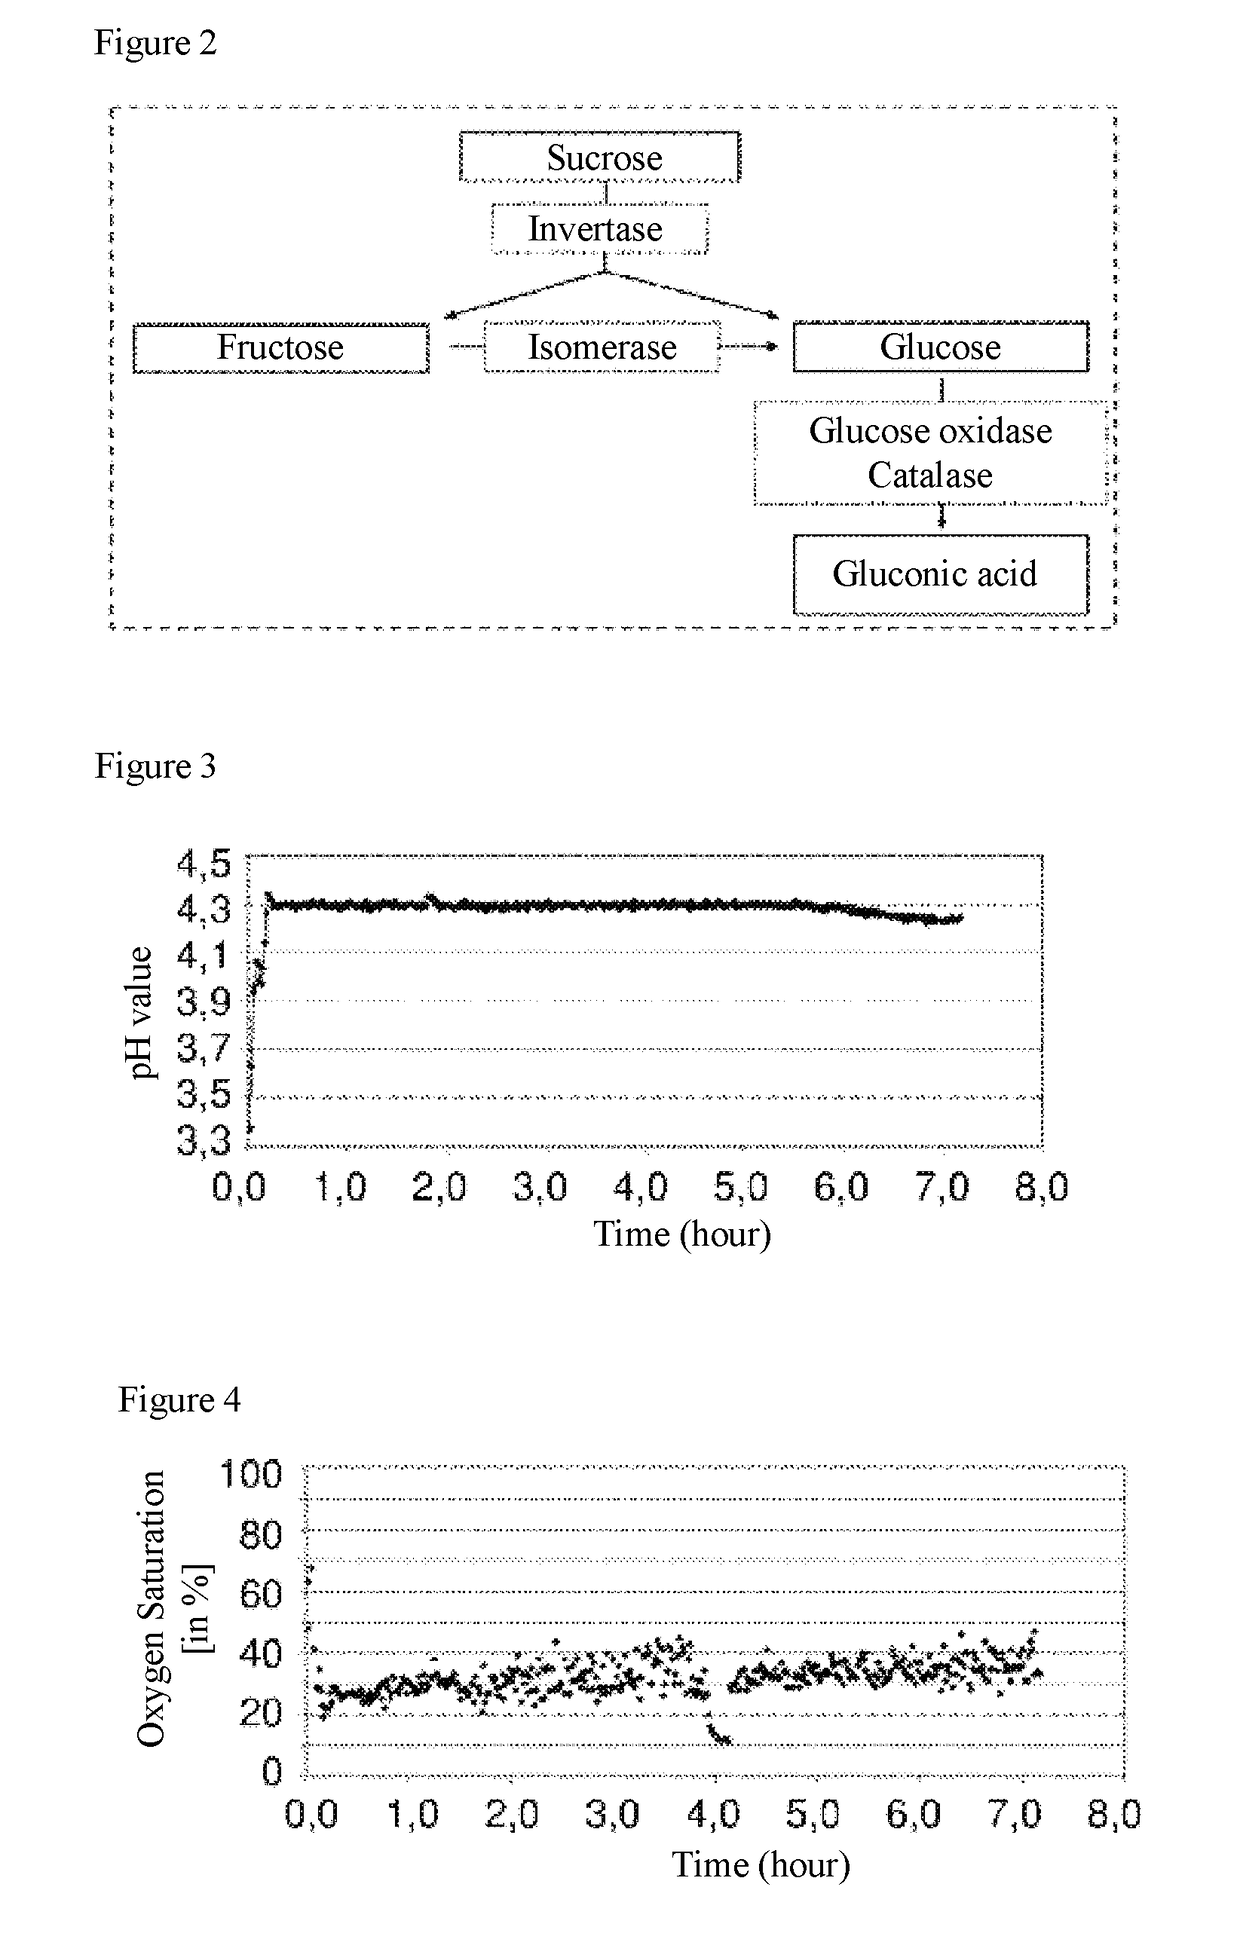 Method and device for the biotechnological reduction of sugars in fruit educts for the purpose of obtaining reduced-sugar fruit products